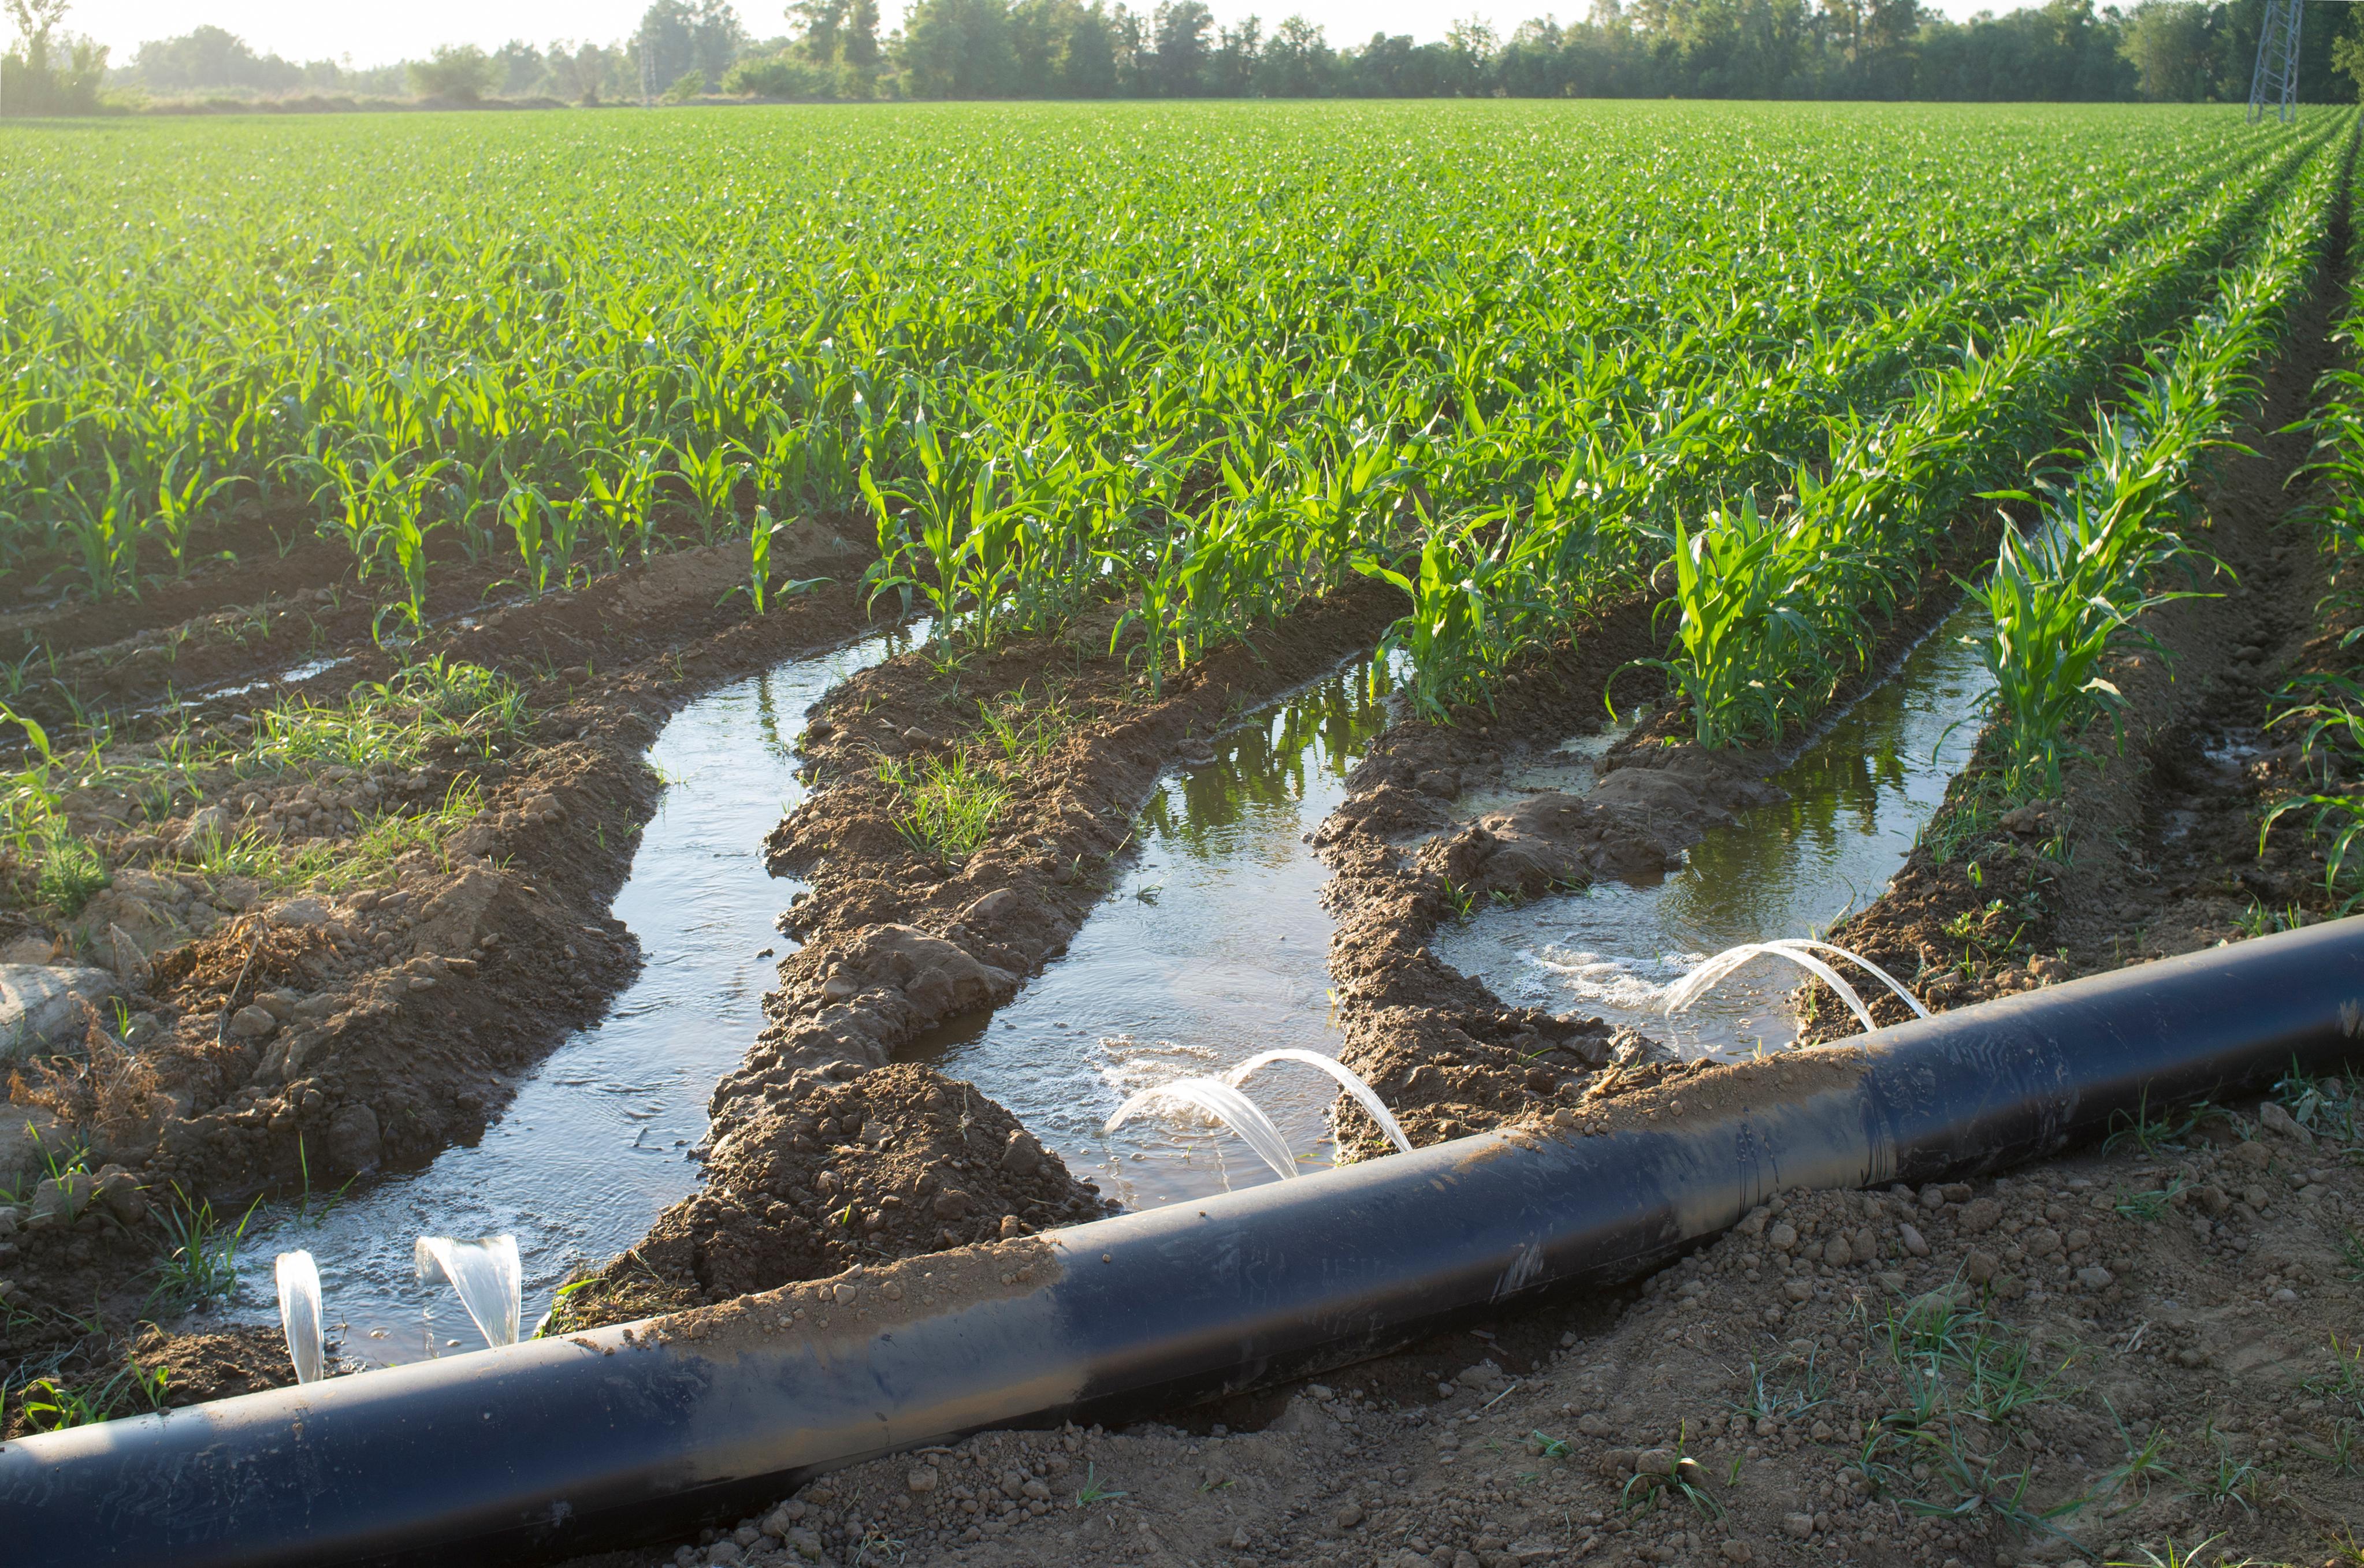 furrow-irrigation-can-help-save-water-but-what-is-it-exactly